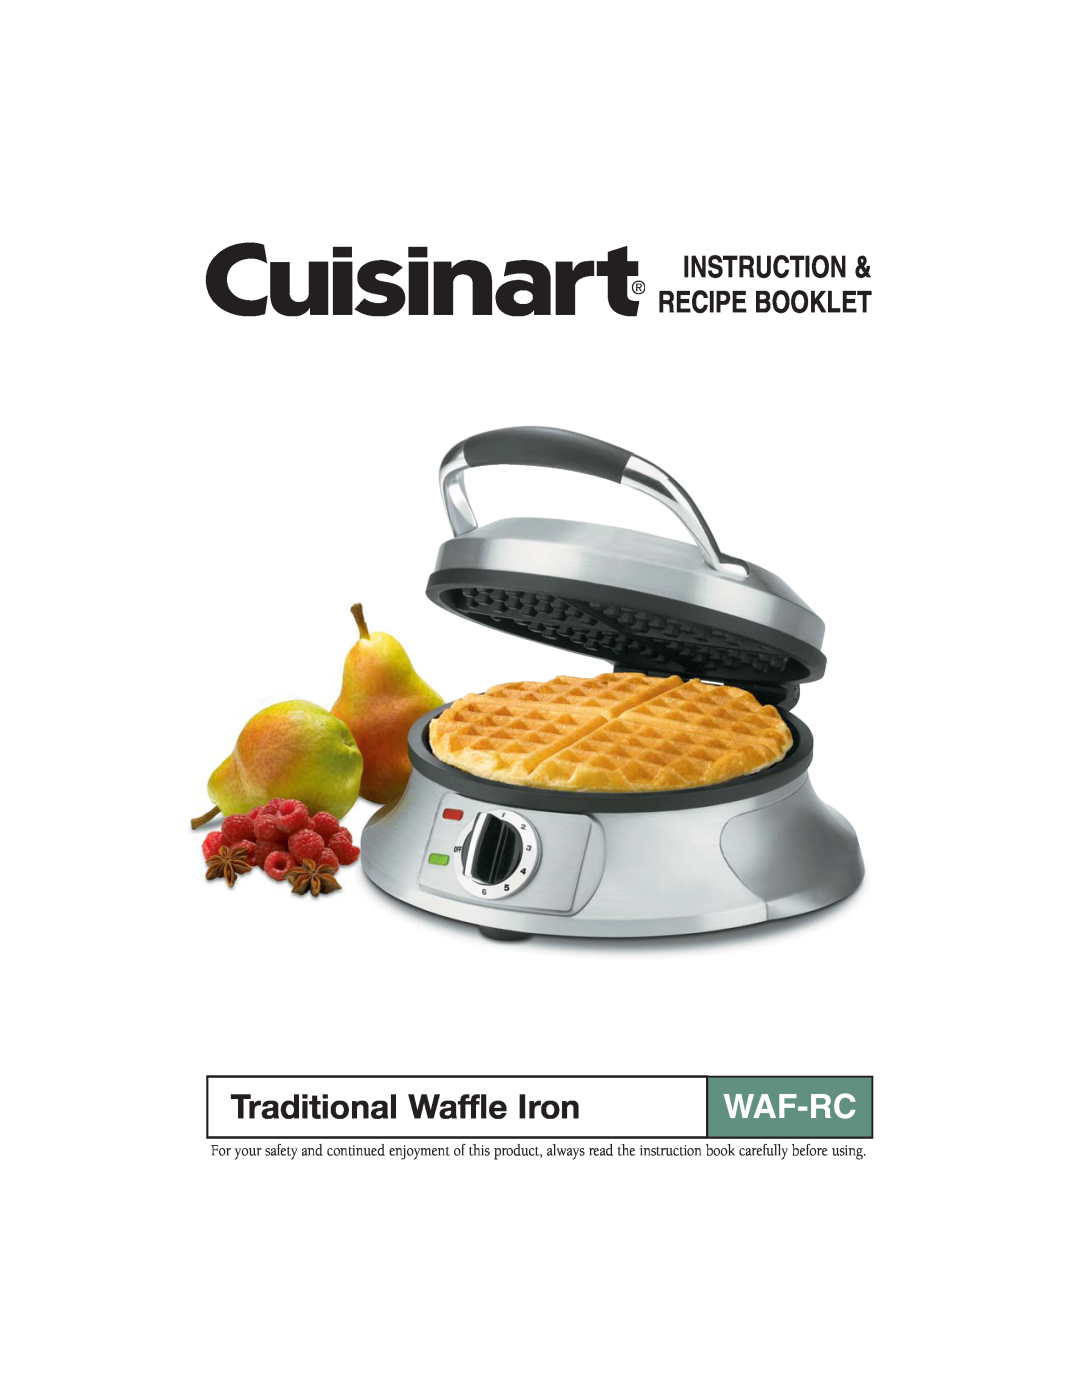 Cuisinart WAF-RC manual Instruction & Recipe Booklet, Traditional Waffle Iron, Waf-Rc 